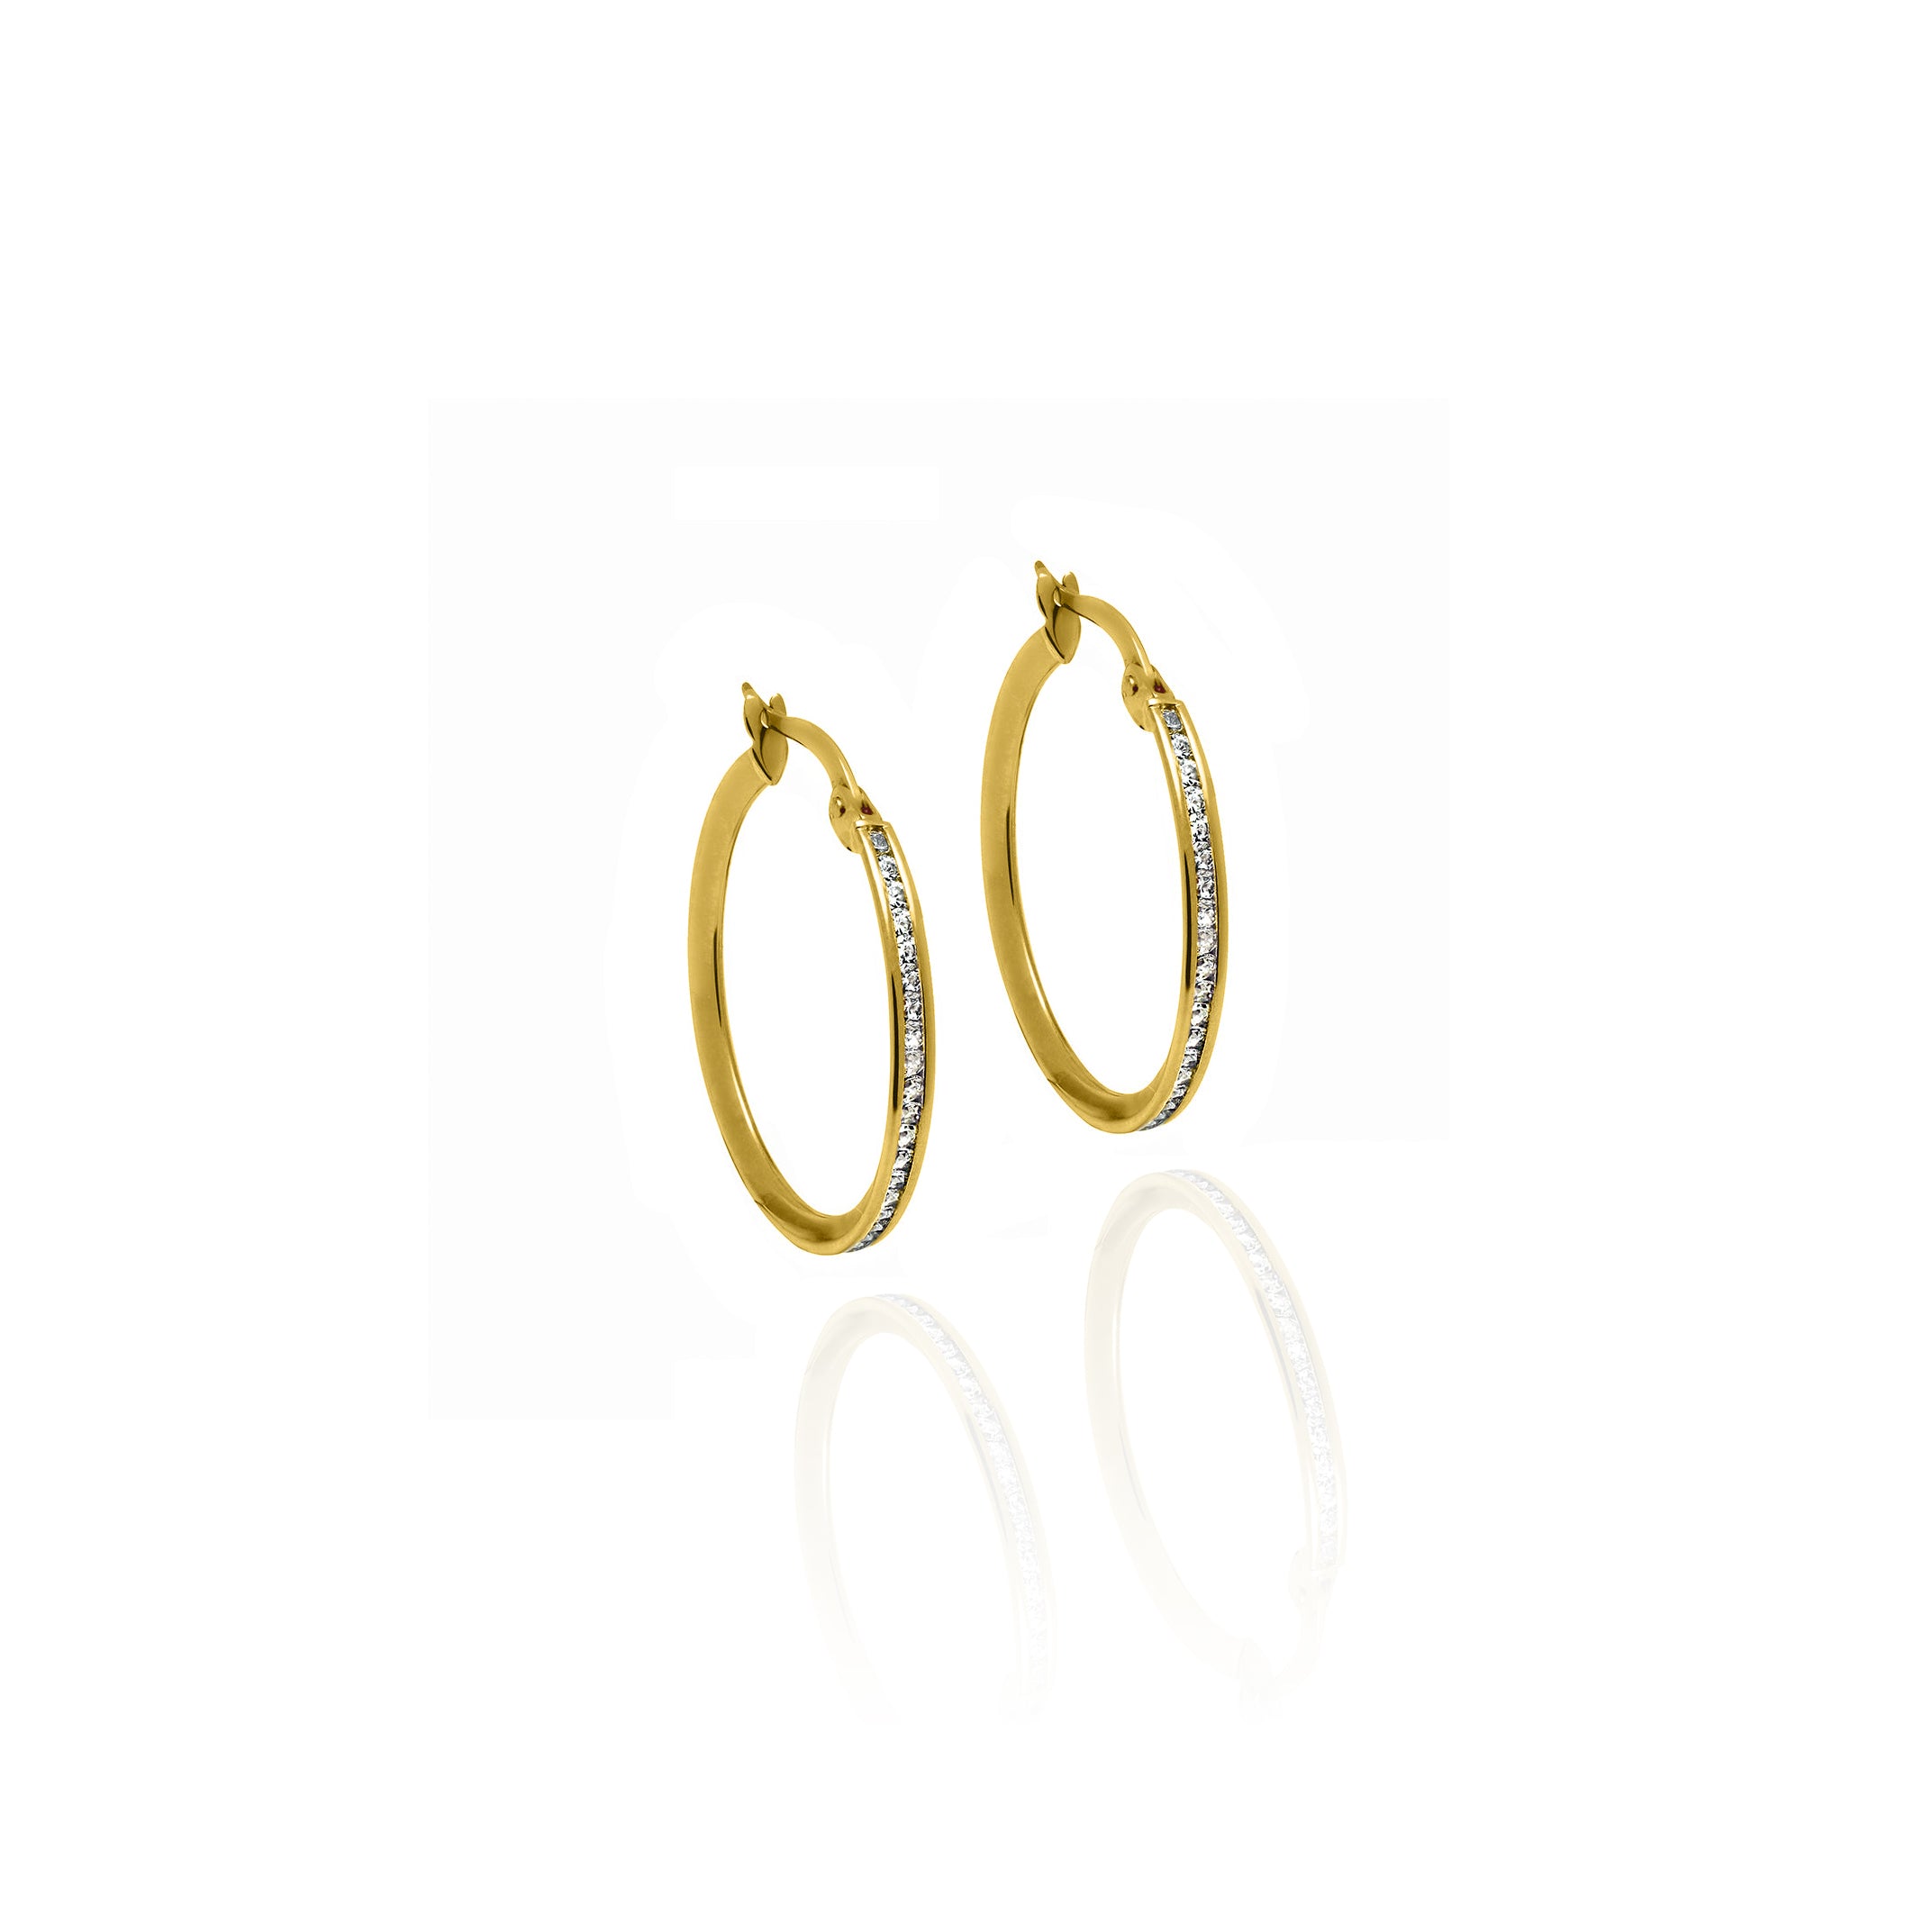 Small Crystal Hoops 2mm Width Solid Gold with Cubic Zirconia Yellow